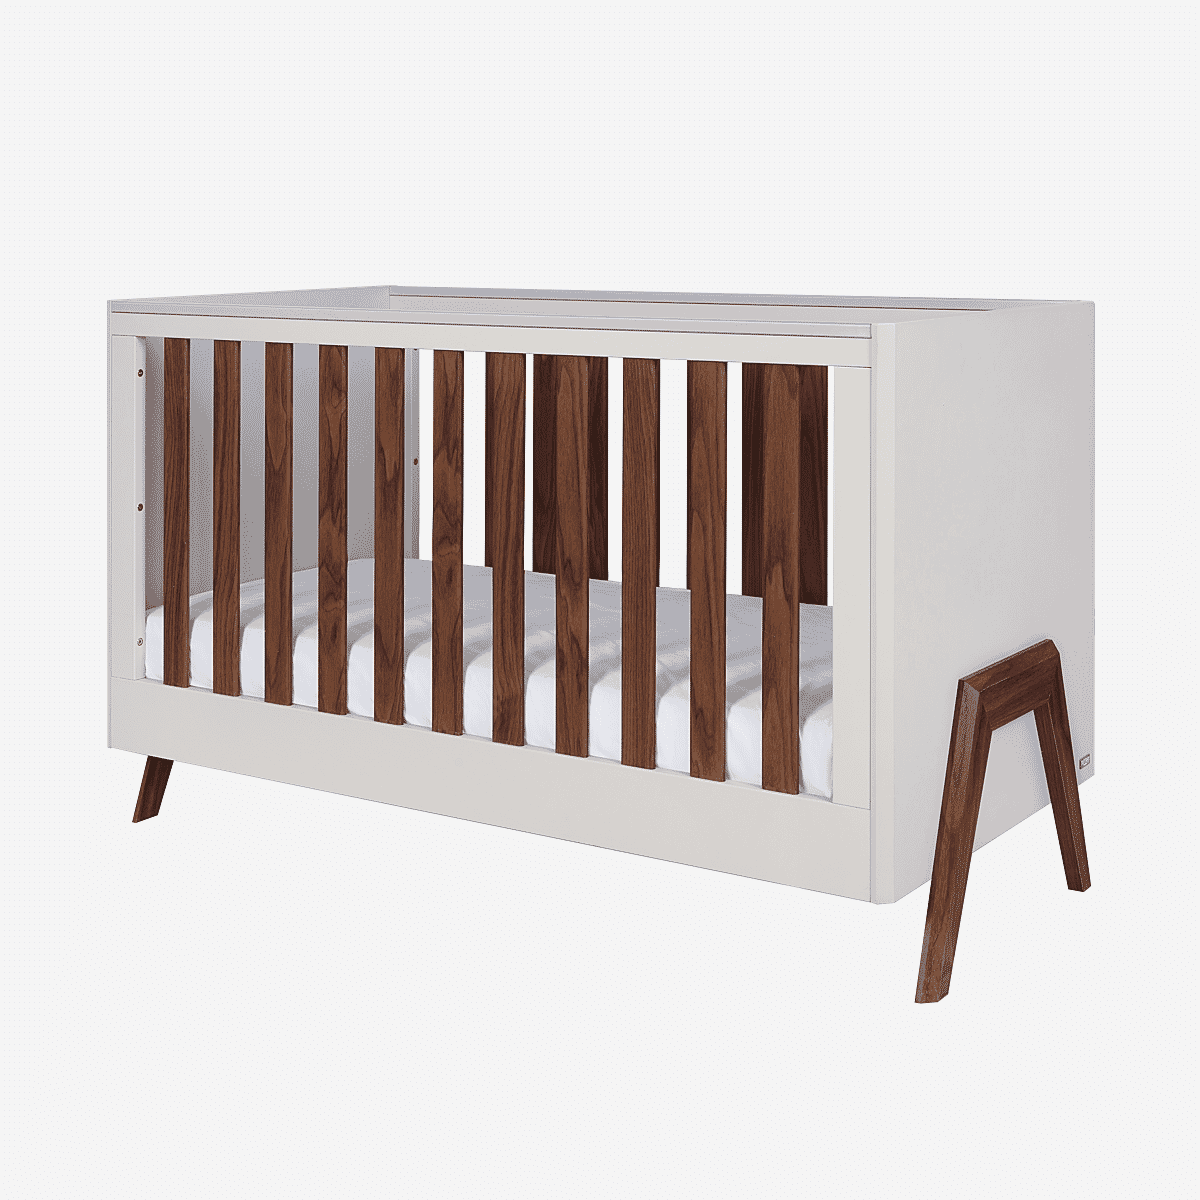 Tutti Bambini Fuori Cot Bed - Warm Walnut/White Sand -  | For Your Little One